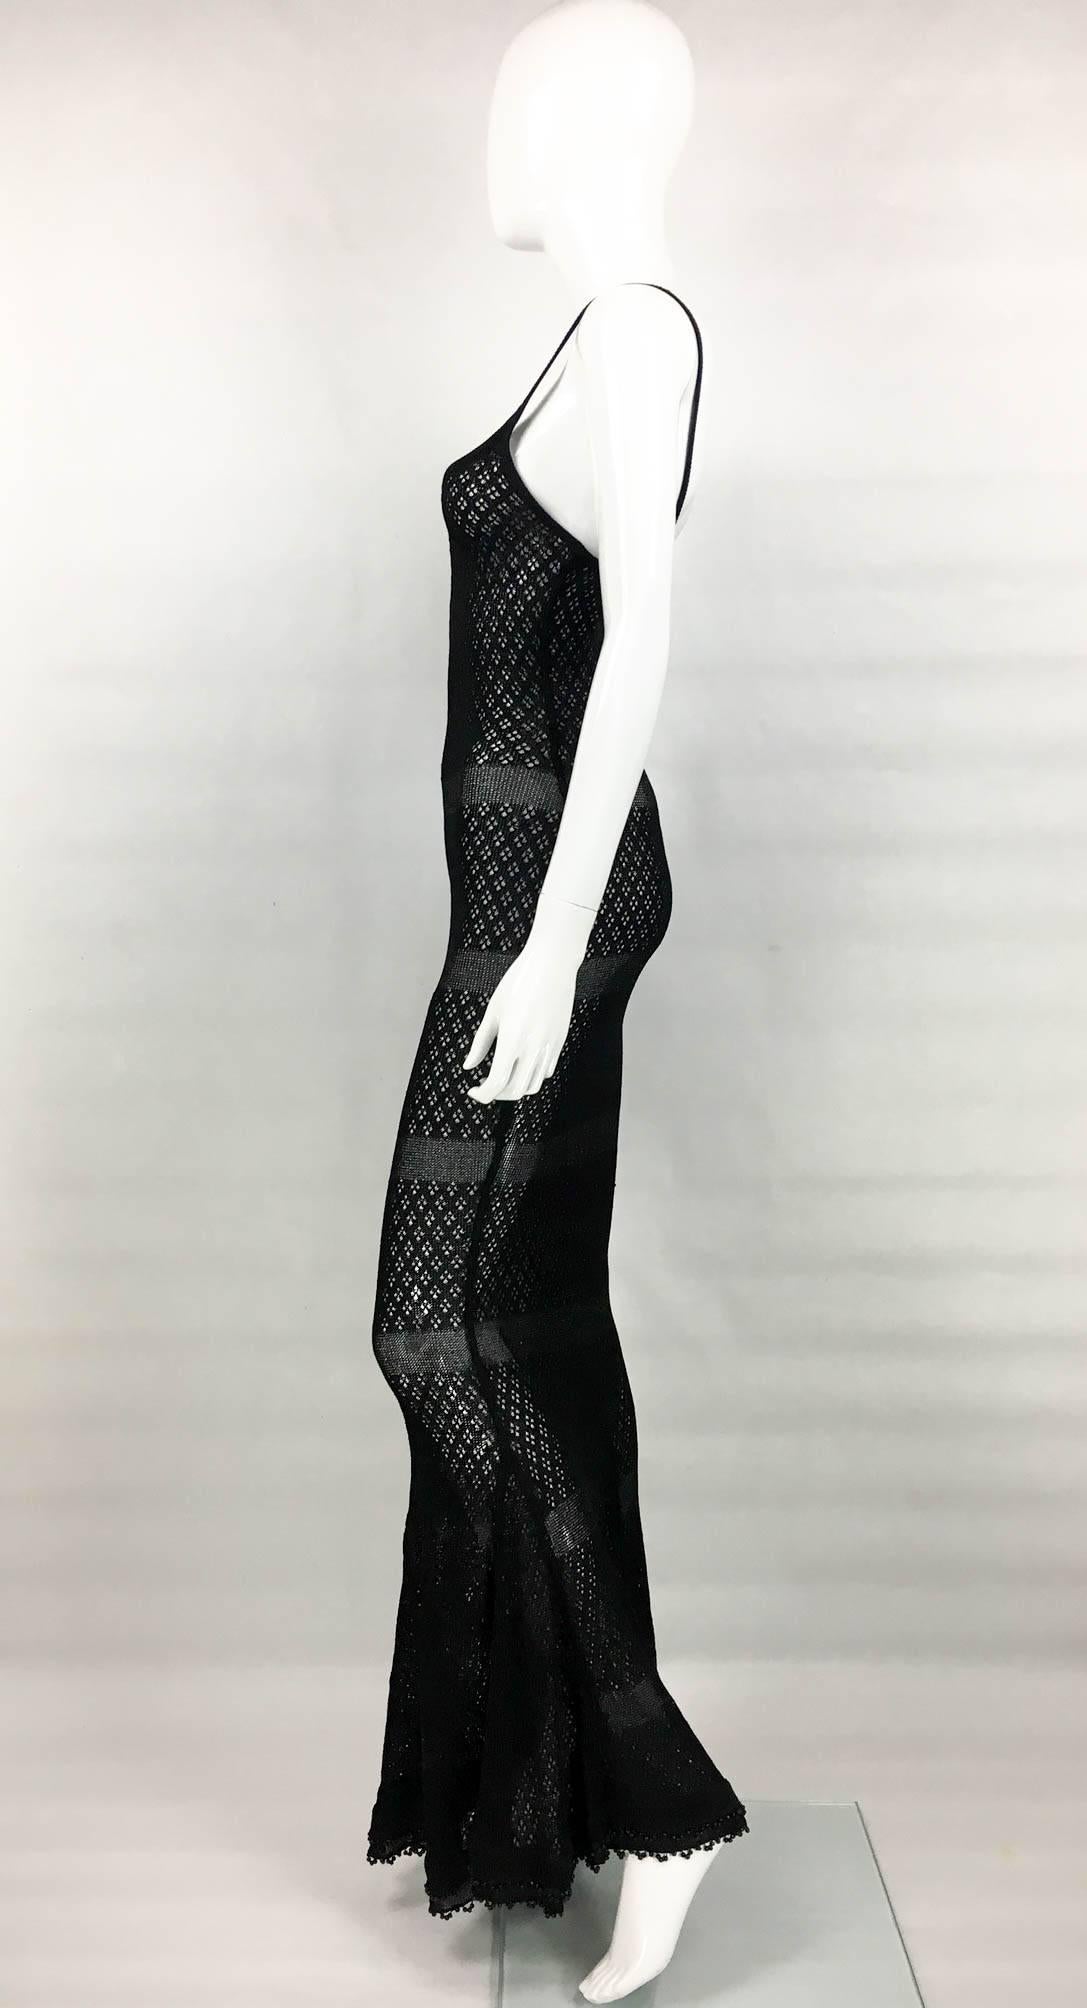 Women's Chanel Runway and Campaign Sheer Knitted Dress With Pearl Embellishment - 1995